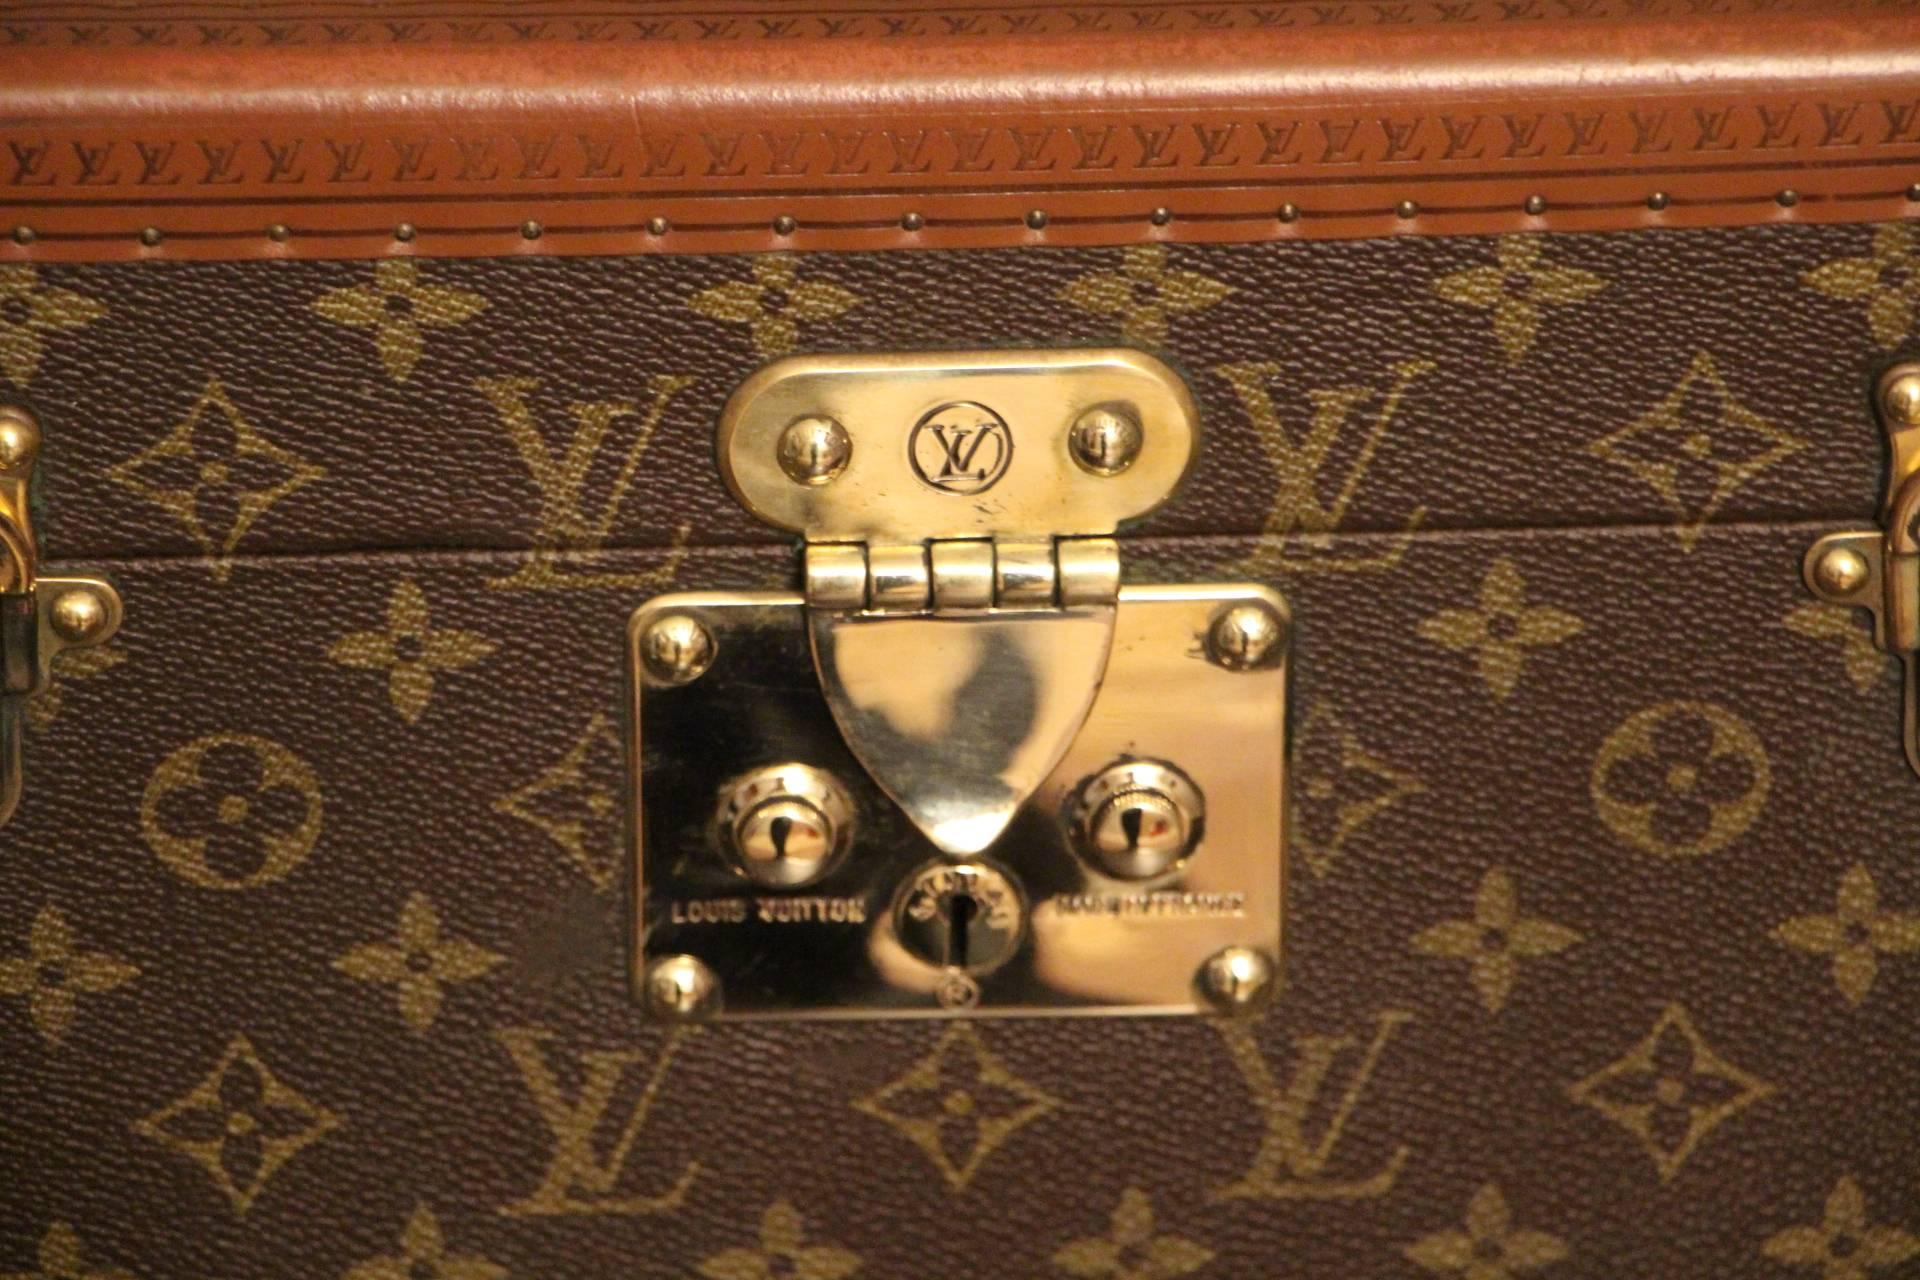 This beauty case features monogram canvas and all brass fittings.
All studs are marked as well as its leather handle.
Interior: beige coated canvas, adjustable leather straps for holding materials. Very clean and fresh.
Removable little